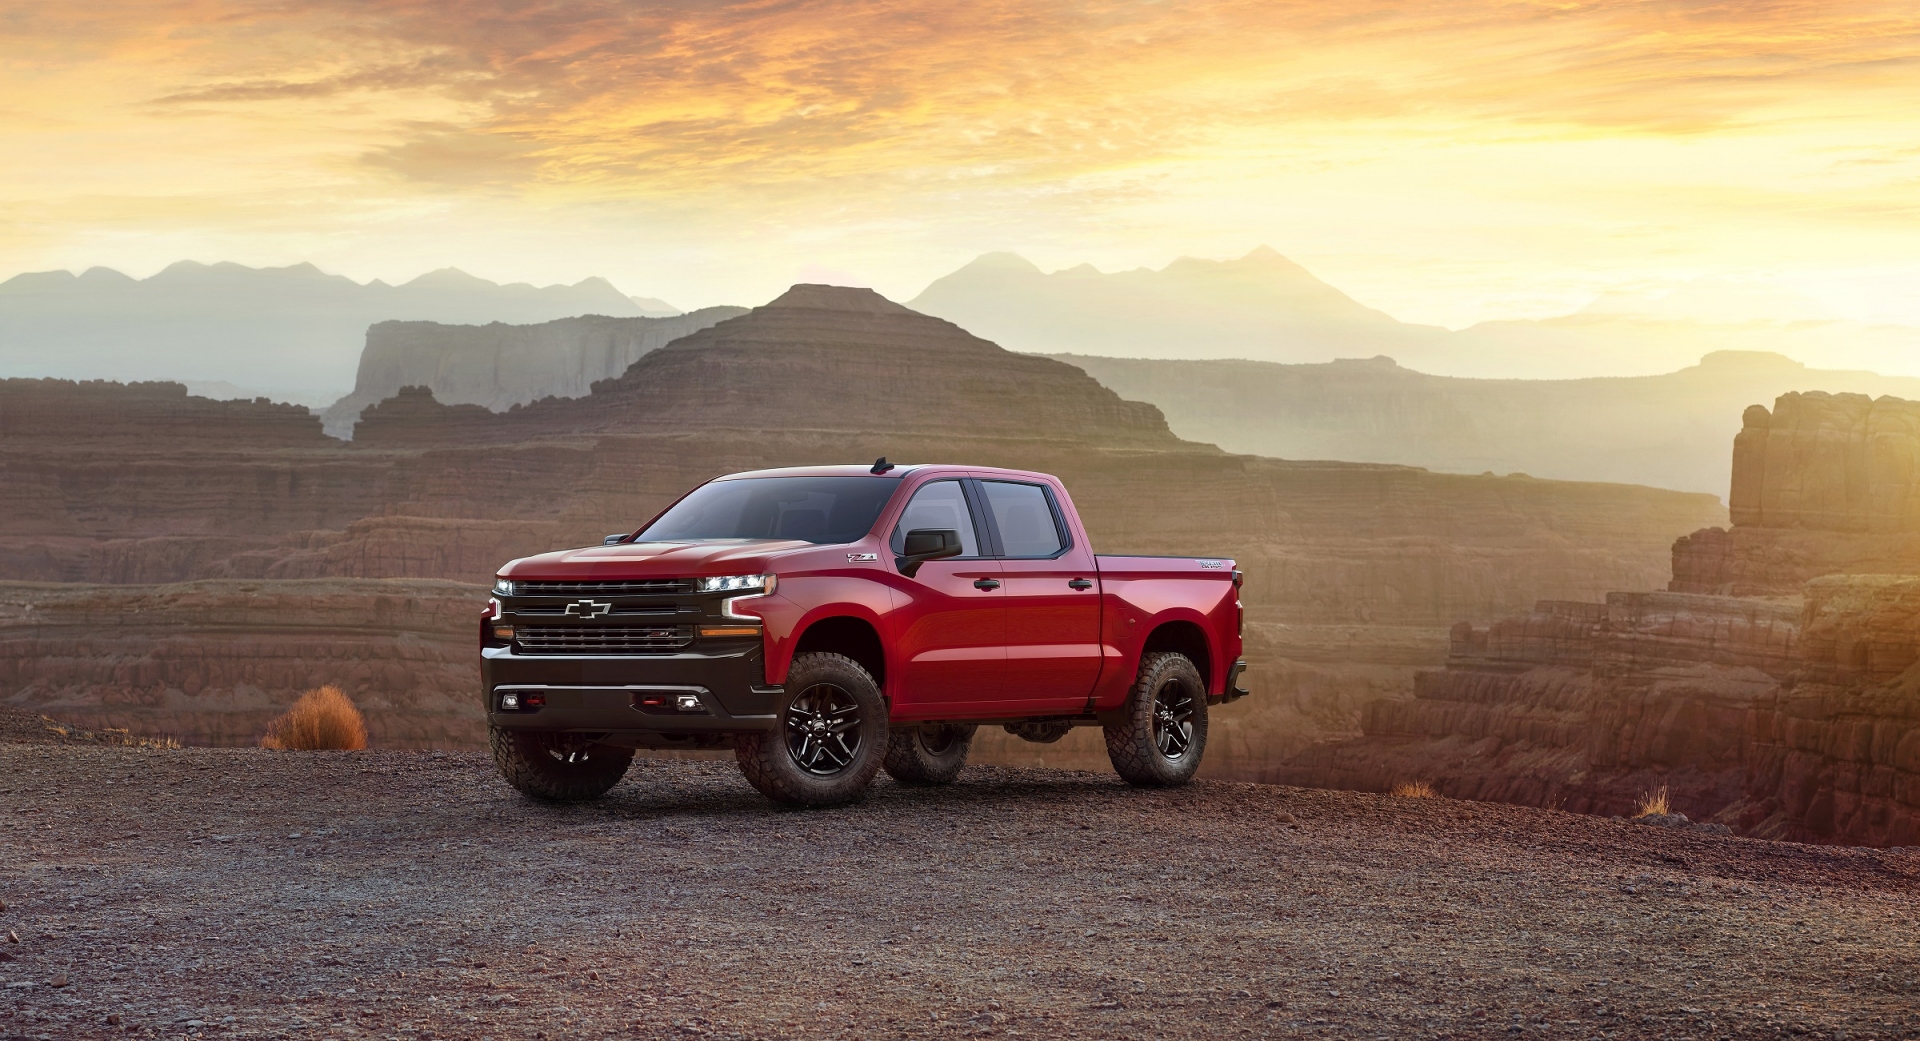 2019 Chevrolet Silverado 1500 Z71 - Red Exterior - Front Side View